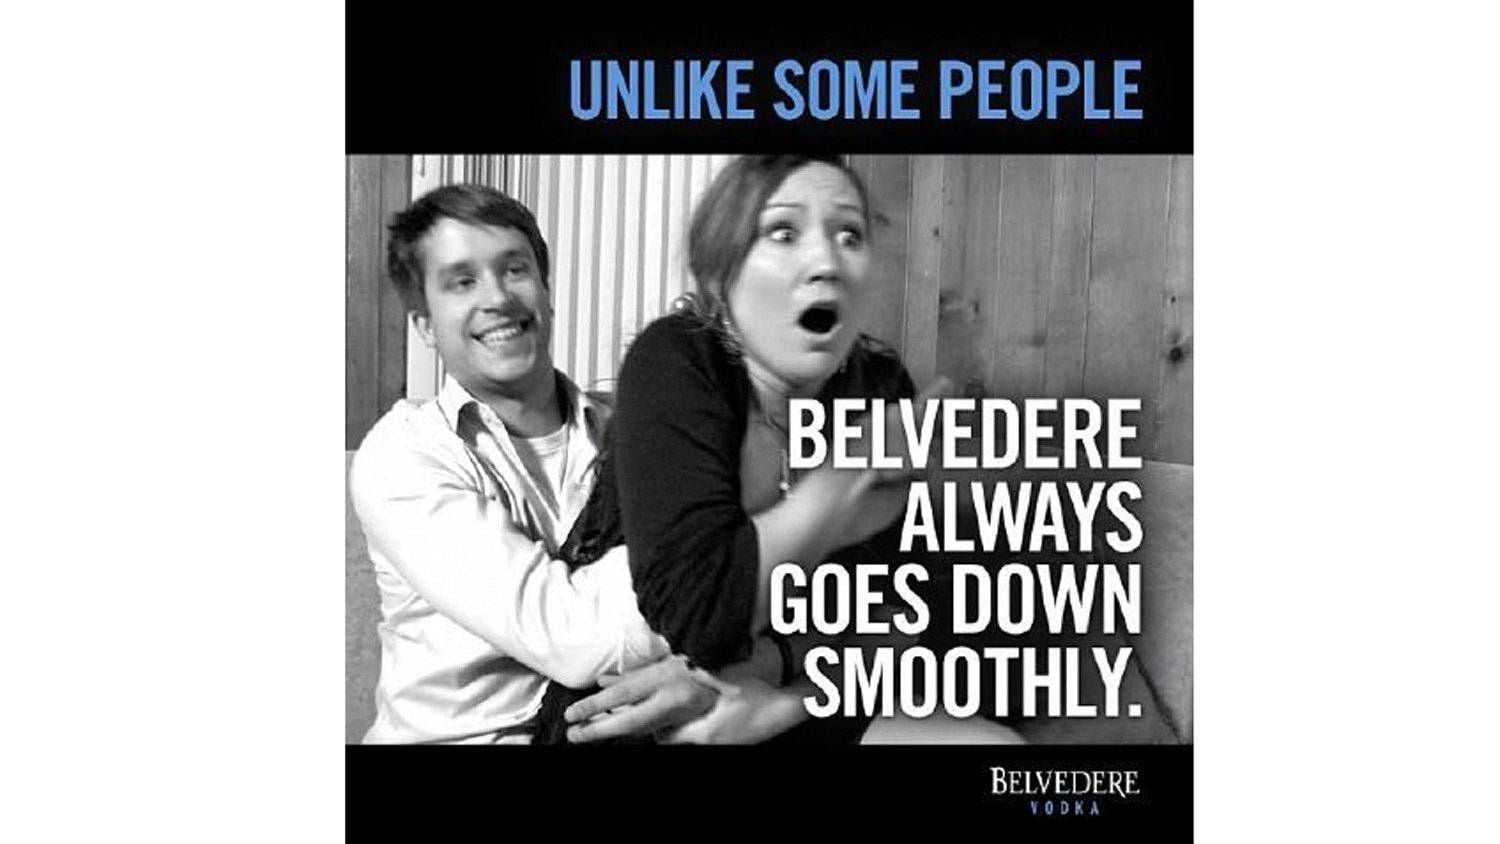 Belvedere Vodka Gets Down and Dirty in Ads